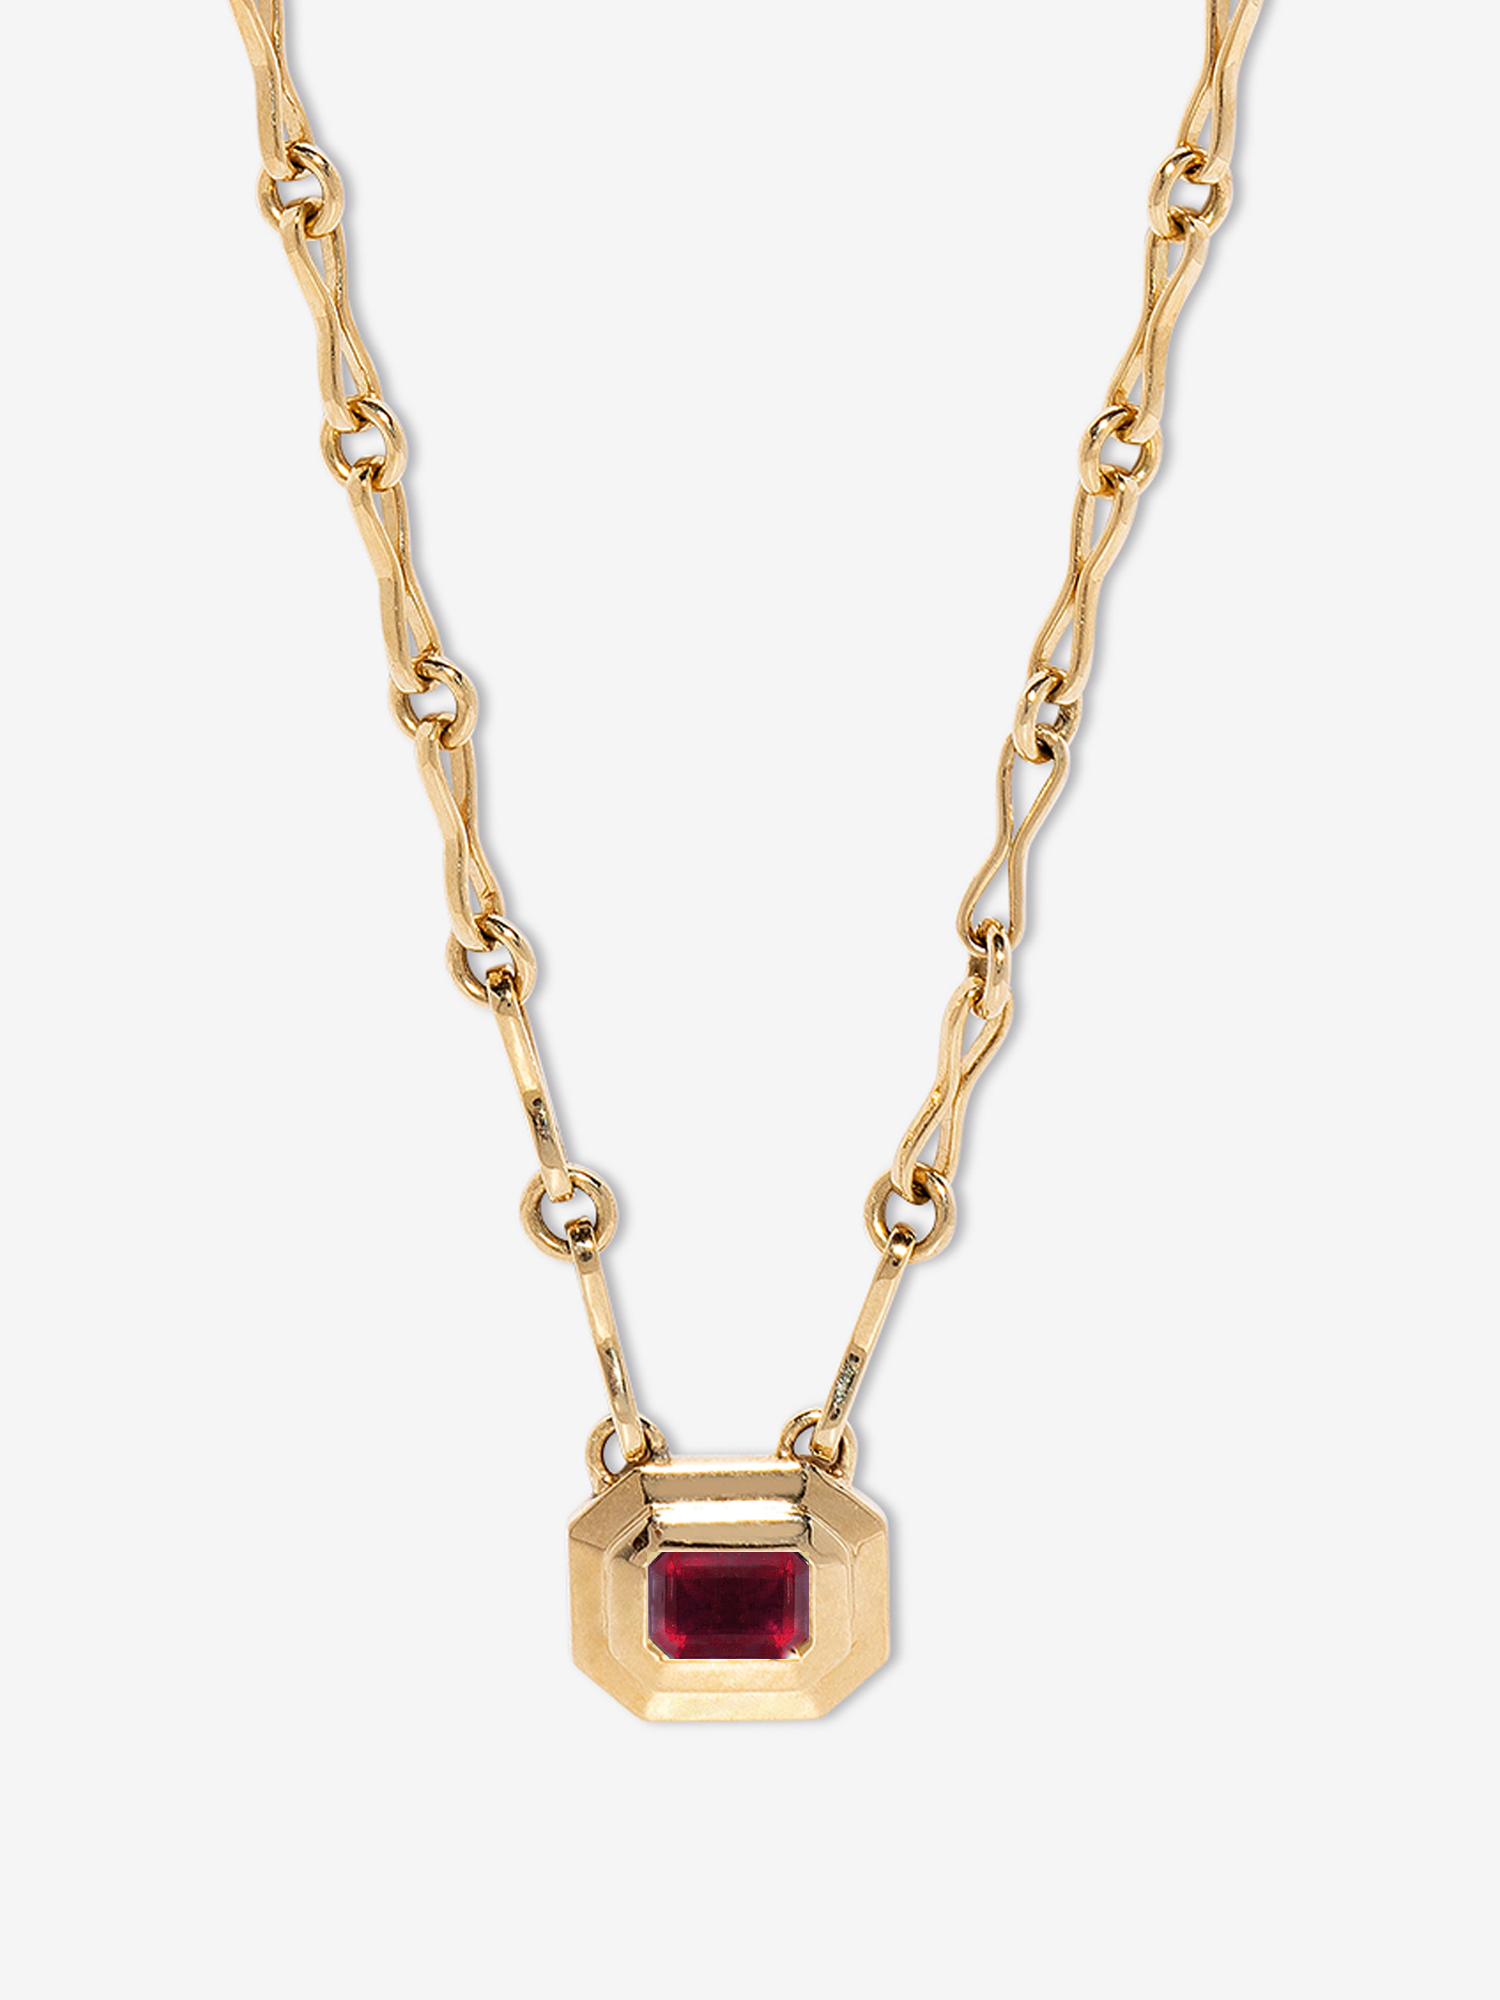 Staircase Ruby Handmade Chain Necklace